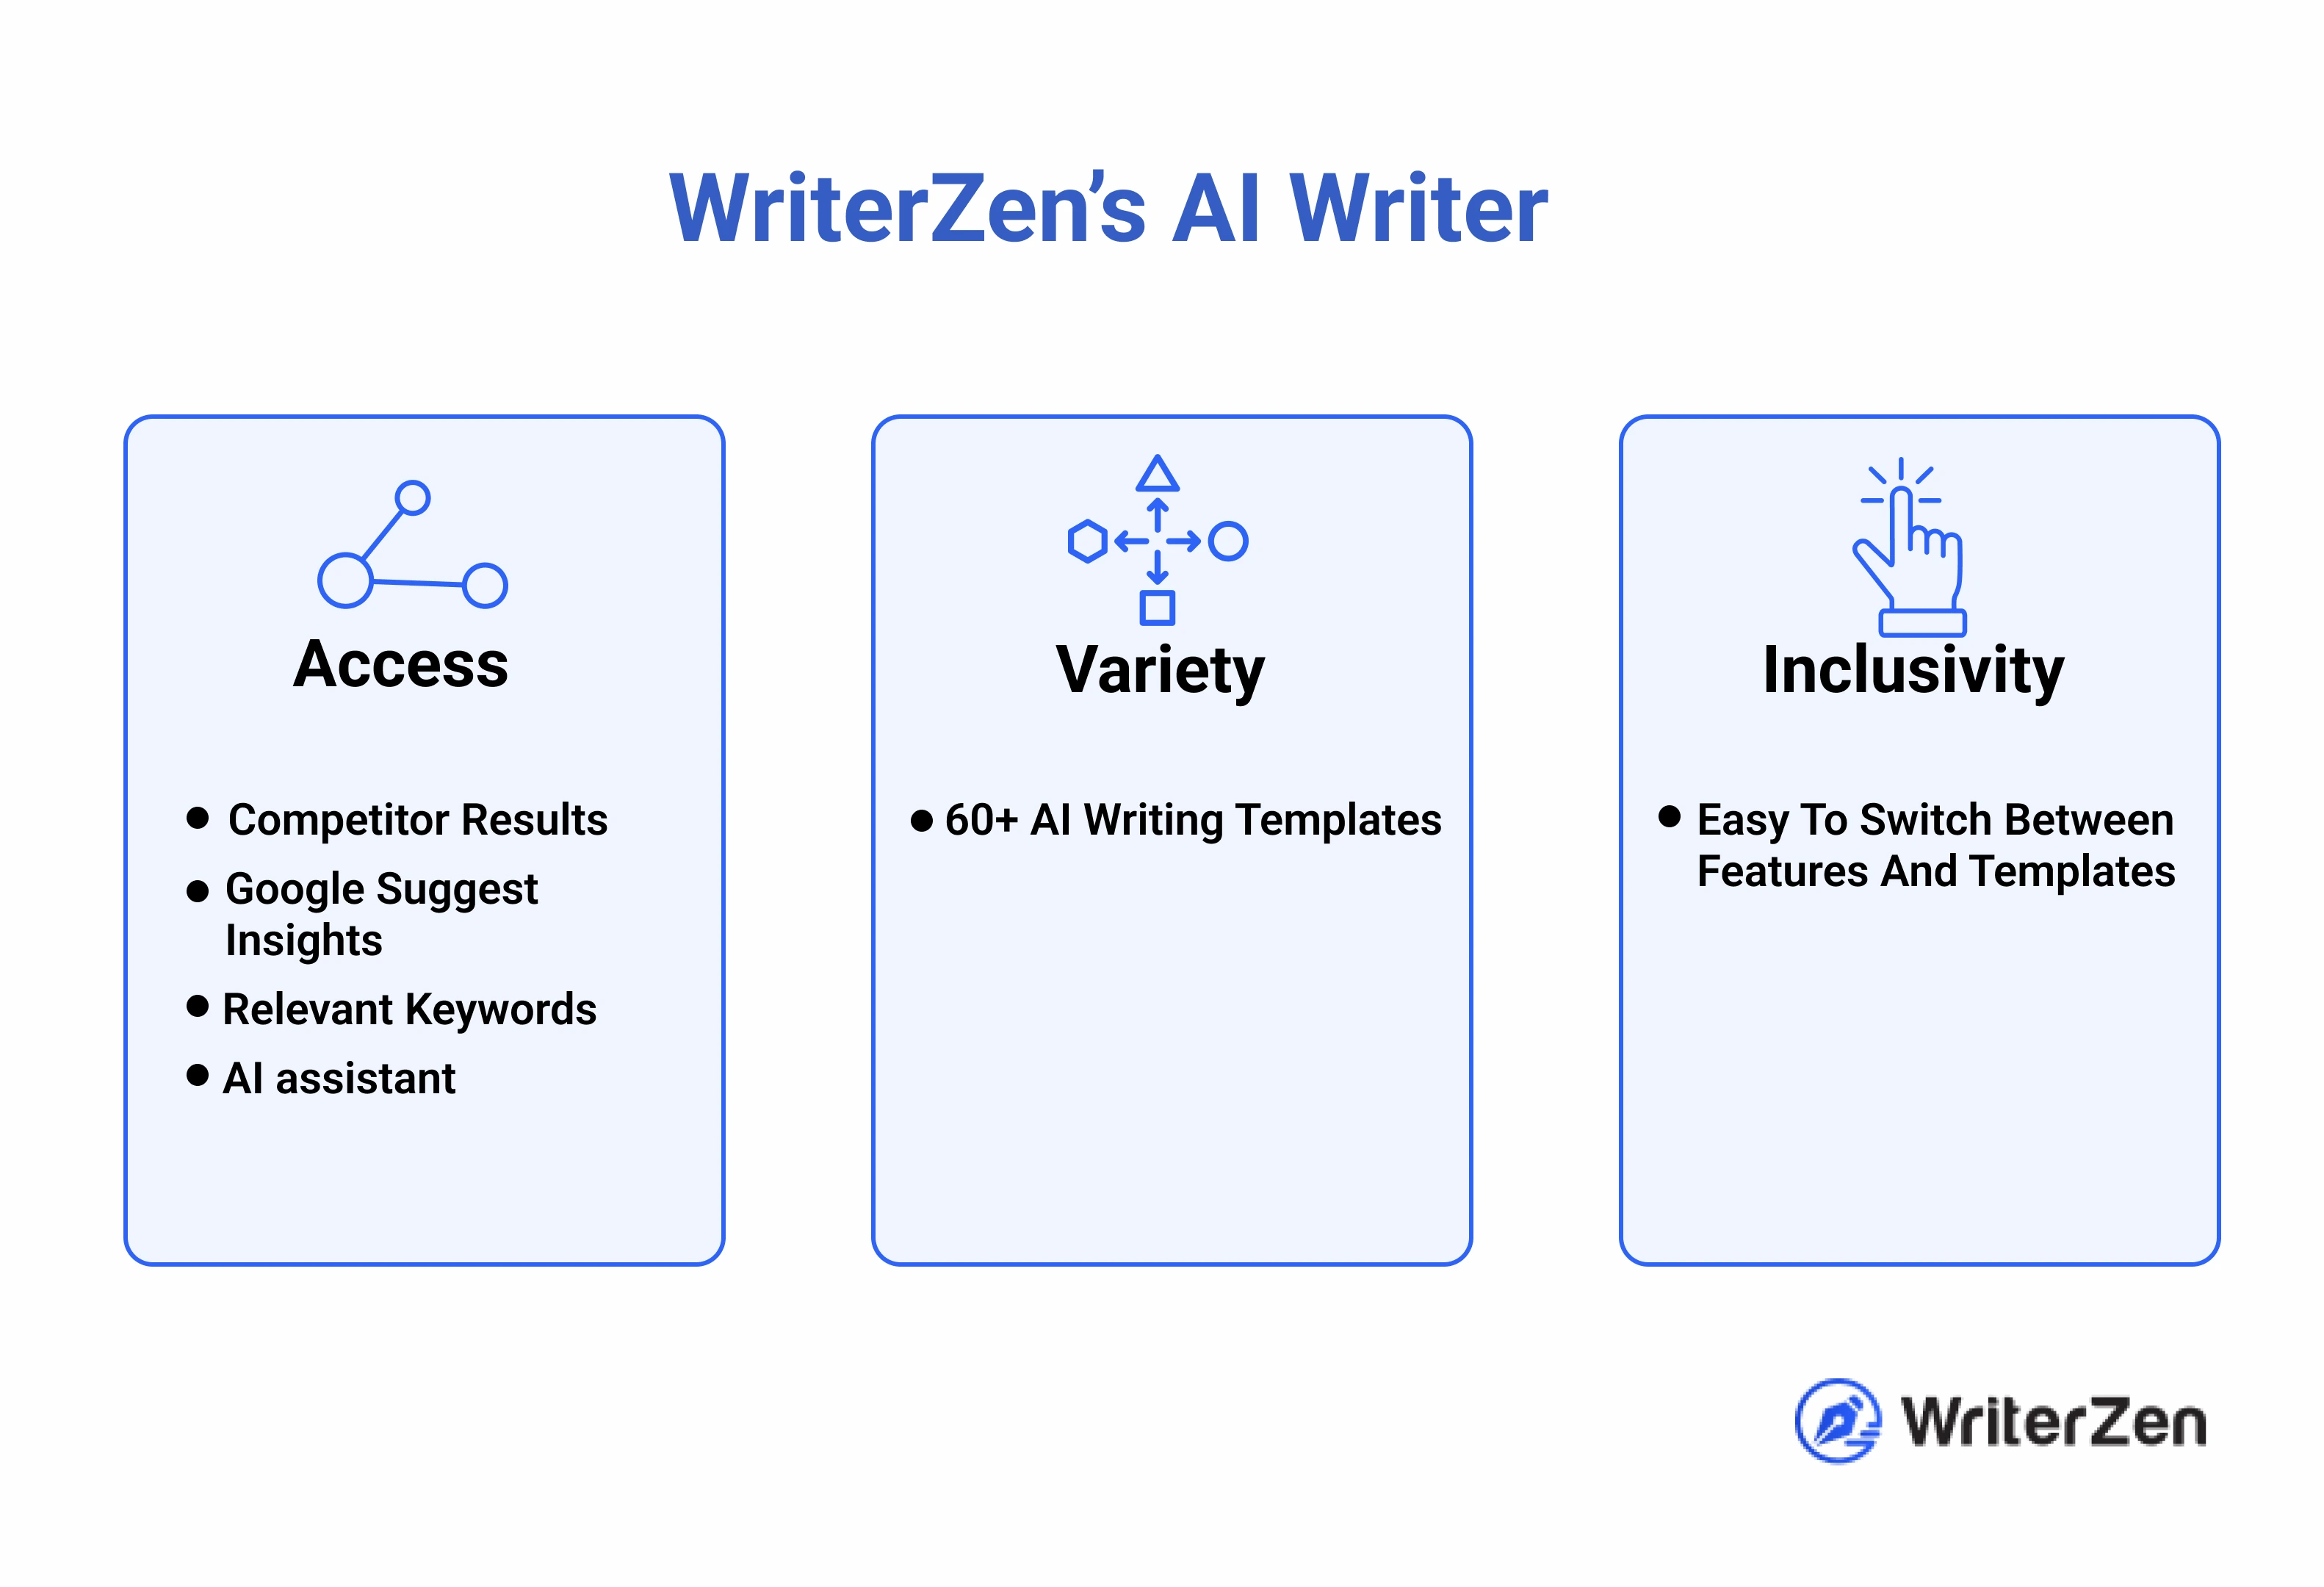 AI Assistant specialties that simplify your content workflow